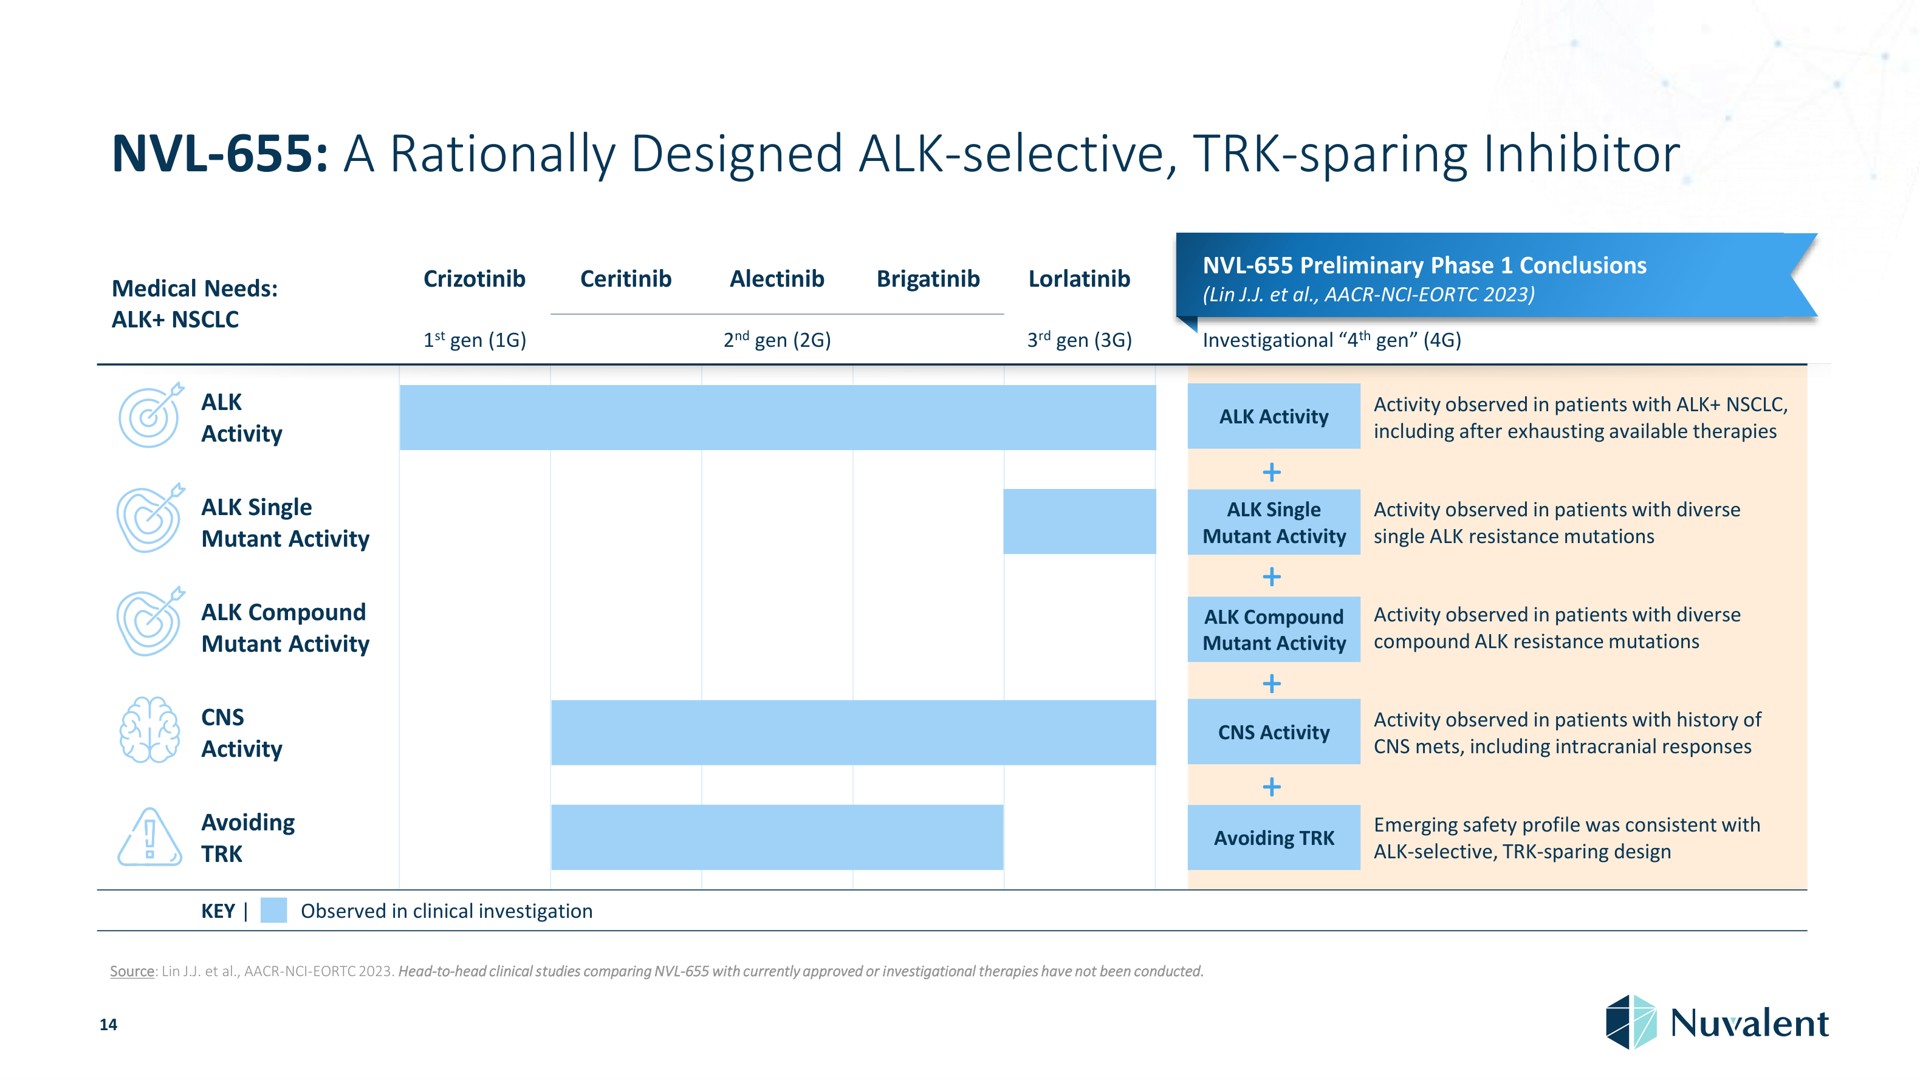 a rationally designed alk selective sparing inhibitor needs preliminary phase conclusions else alk gen gen gen investigational gen activity alk single mutant activity alk compound mutant activity activity alk activity activity observed in patients with alk including after exhausting available therapies alk single mutant activity activity observed in patients with diverse single alk resistance mutations alk compound mutant activity activity observed in patients with diverse compound alk resistance mutations activity avoiding activity observed in patients with history of including intracranial responses i i i emerging safety profile was consistent with design i key observed in clinical investigation source lin head to head clinical studies comparing with currently approved or investigational therapies have not been conducted | Nuvalent